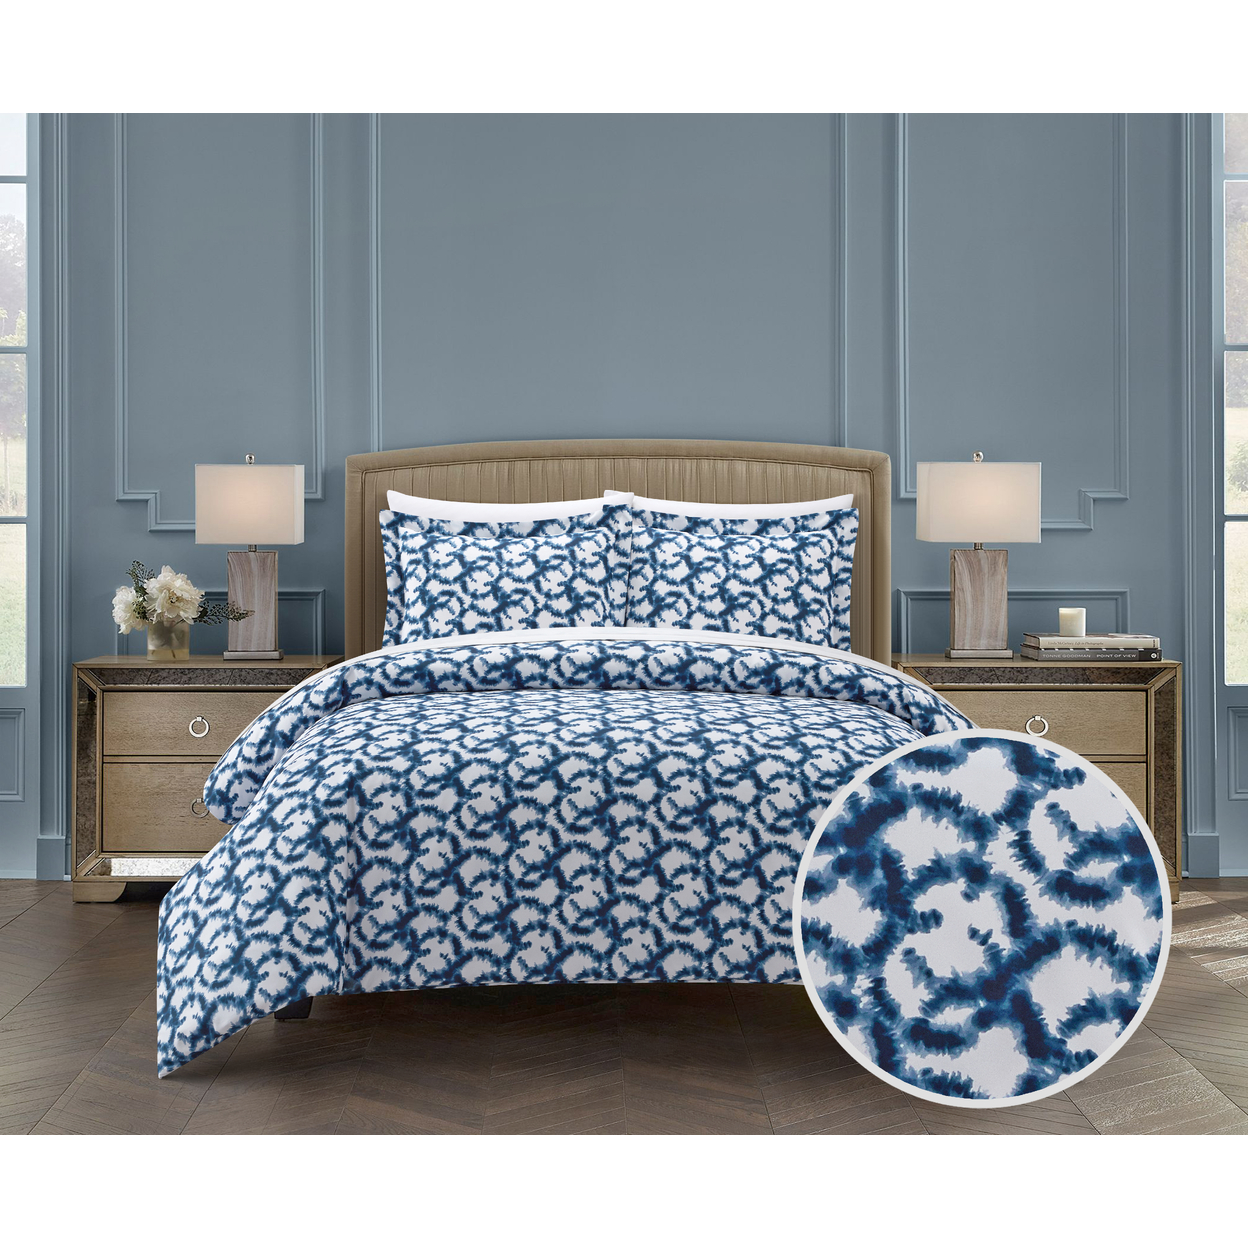 Khrissie 2 Or 3 Piece Duvet Cover Set Watercolor Overlapping Rings Pattern - Navy, King